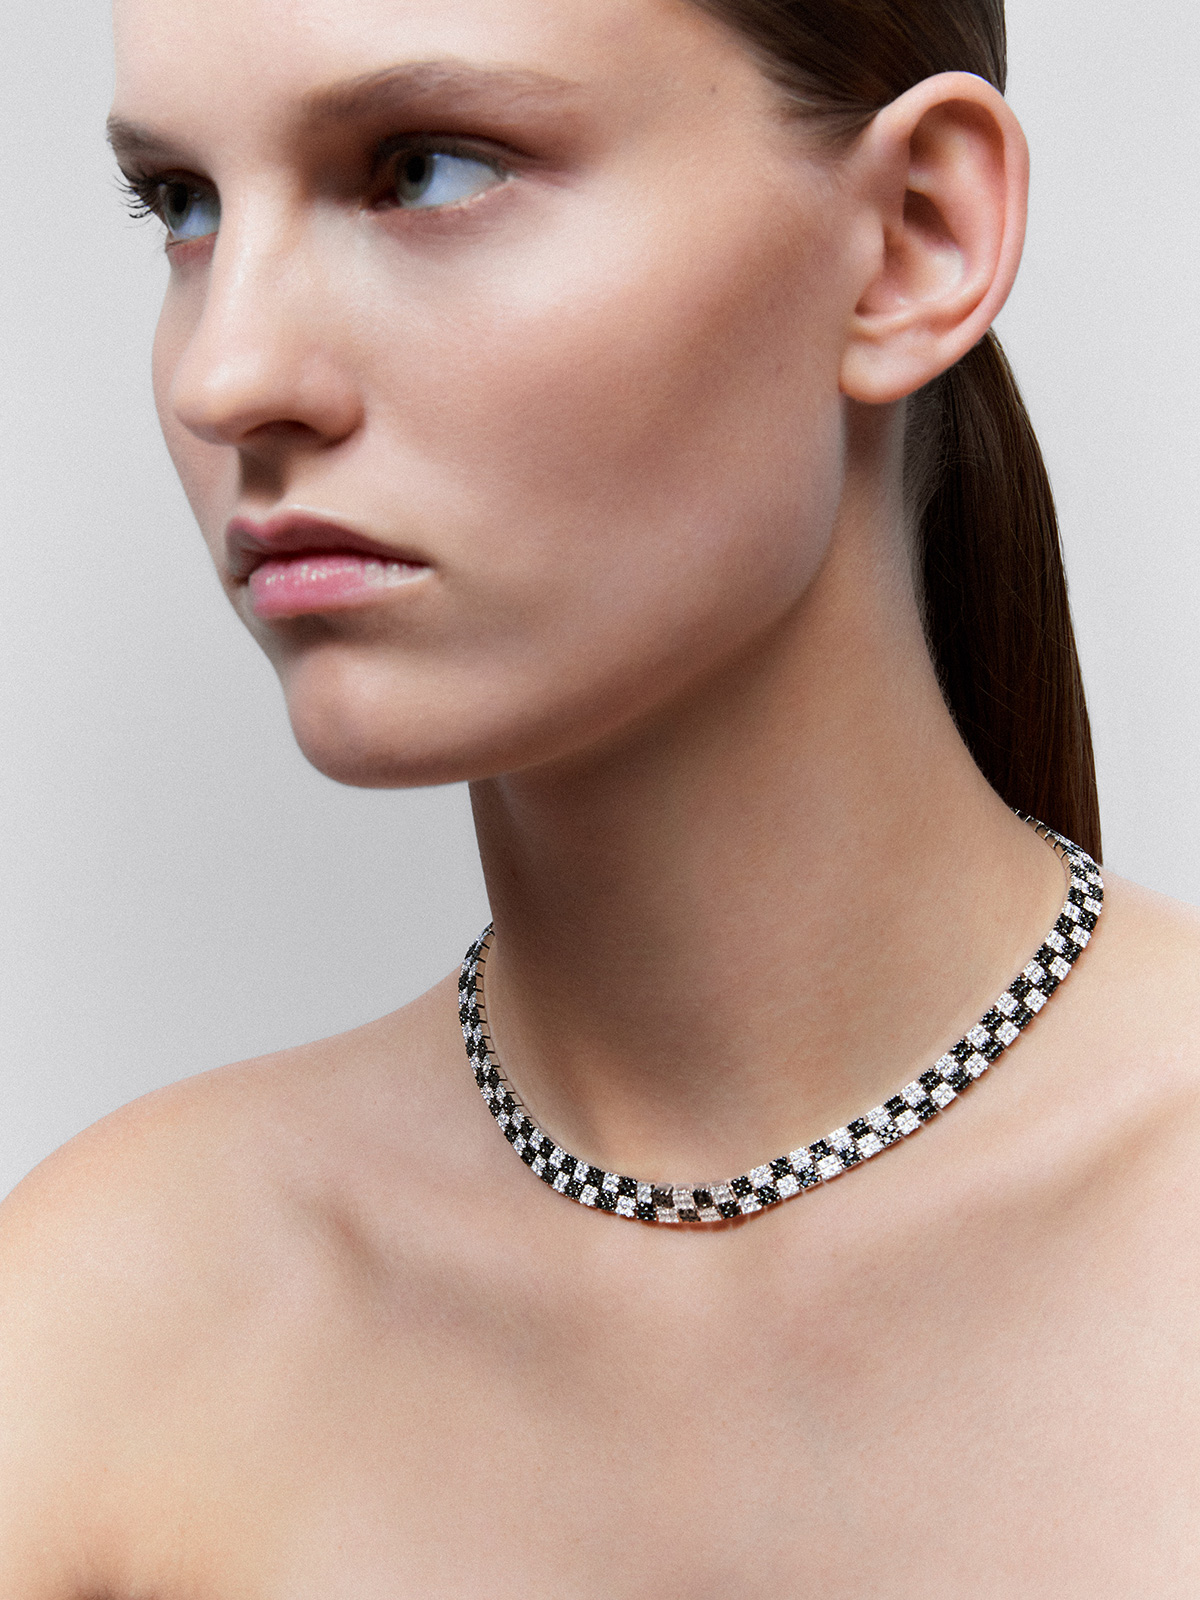 18kt white gold necklace with black and white diamond geometric motifs.